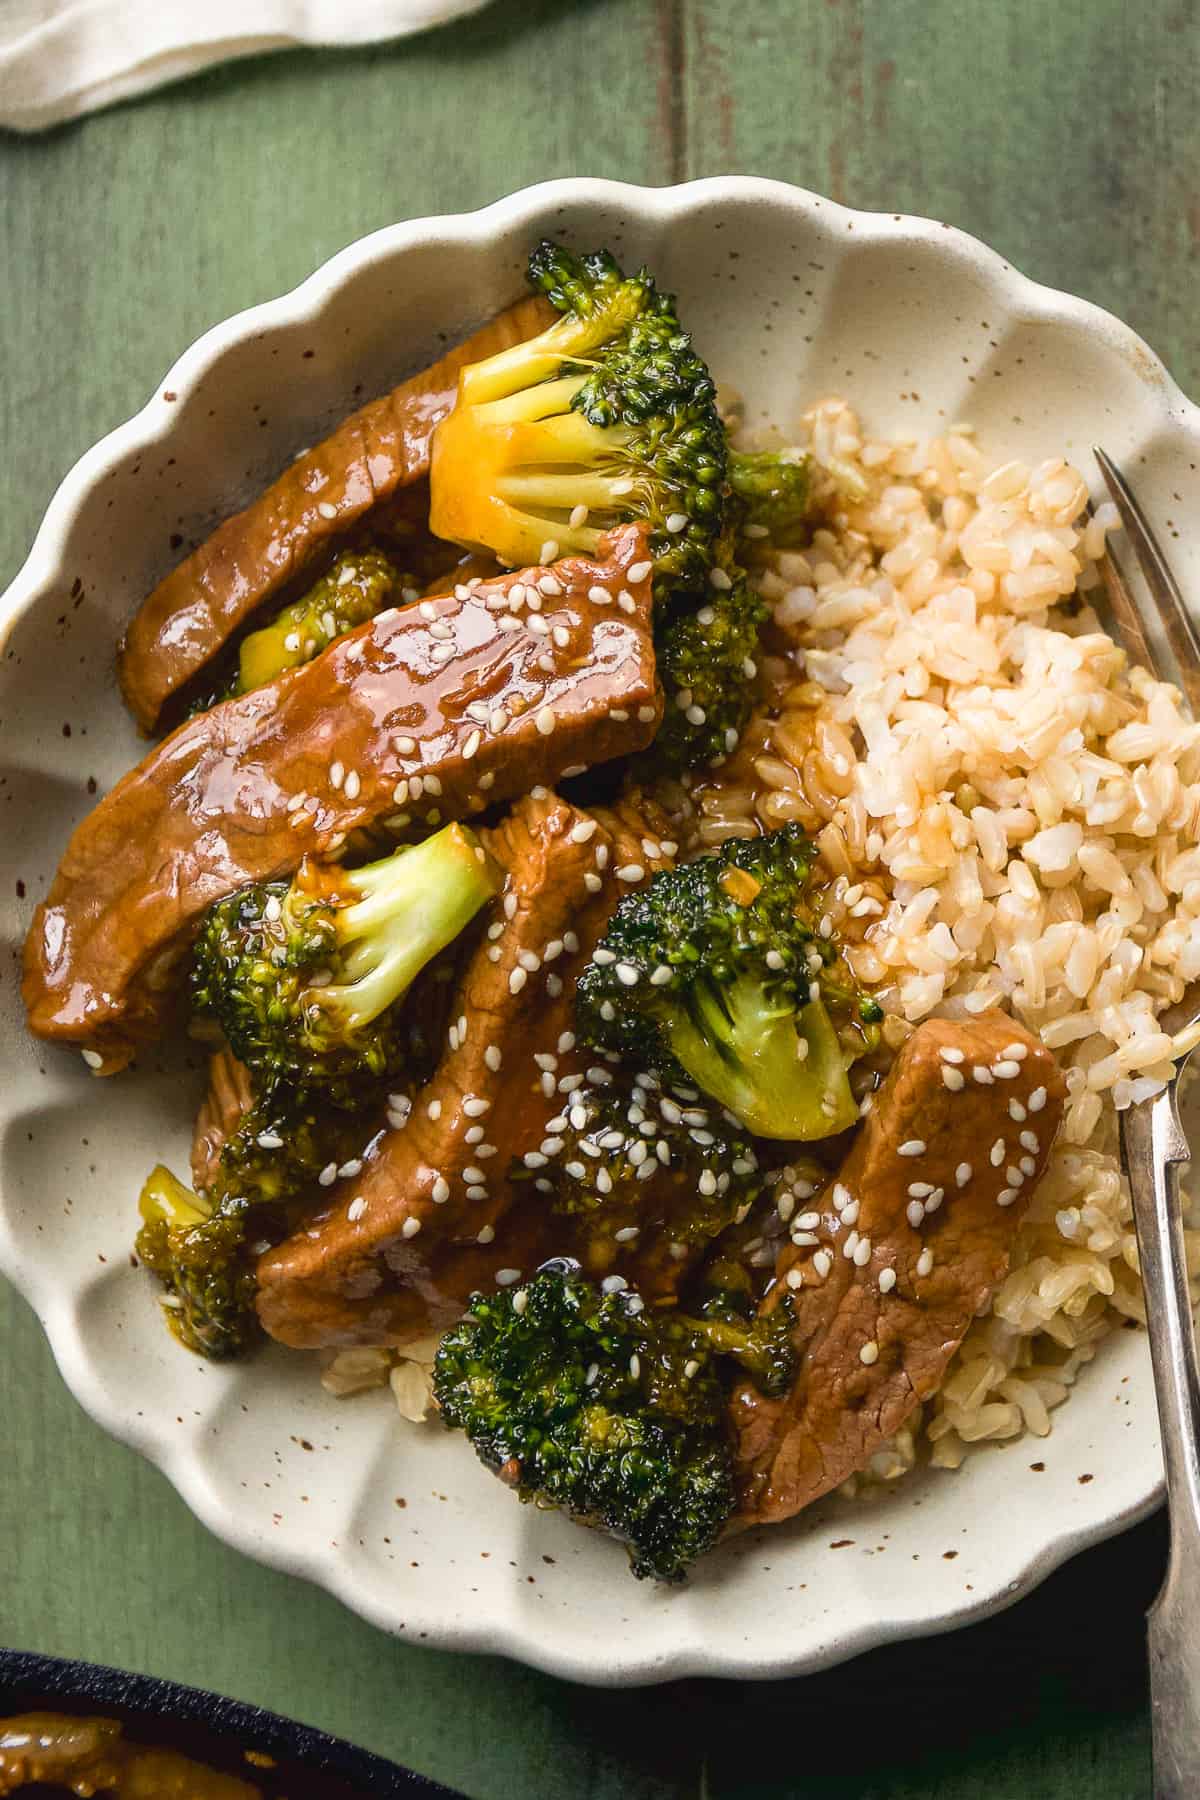 Overhead view of a bowl of beef and broccoli with sesame seeds and rice.